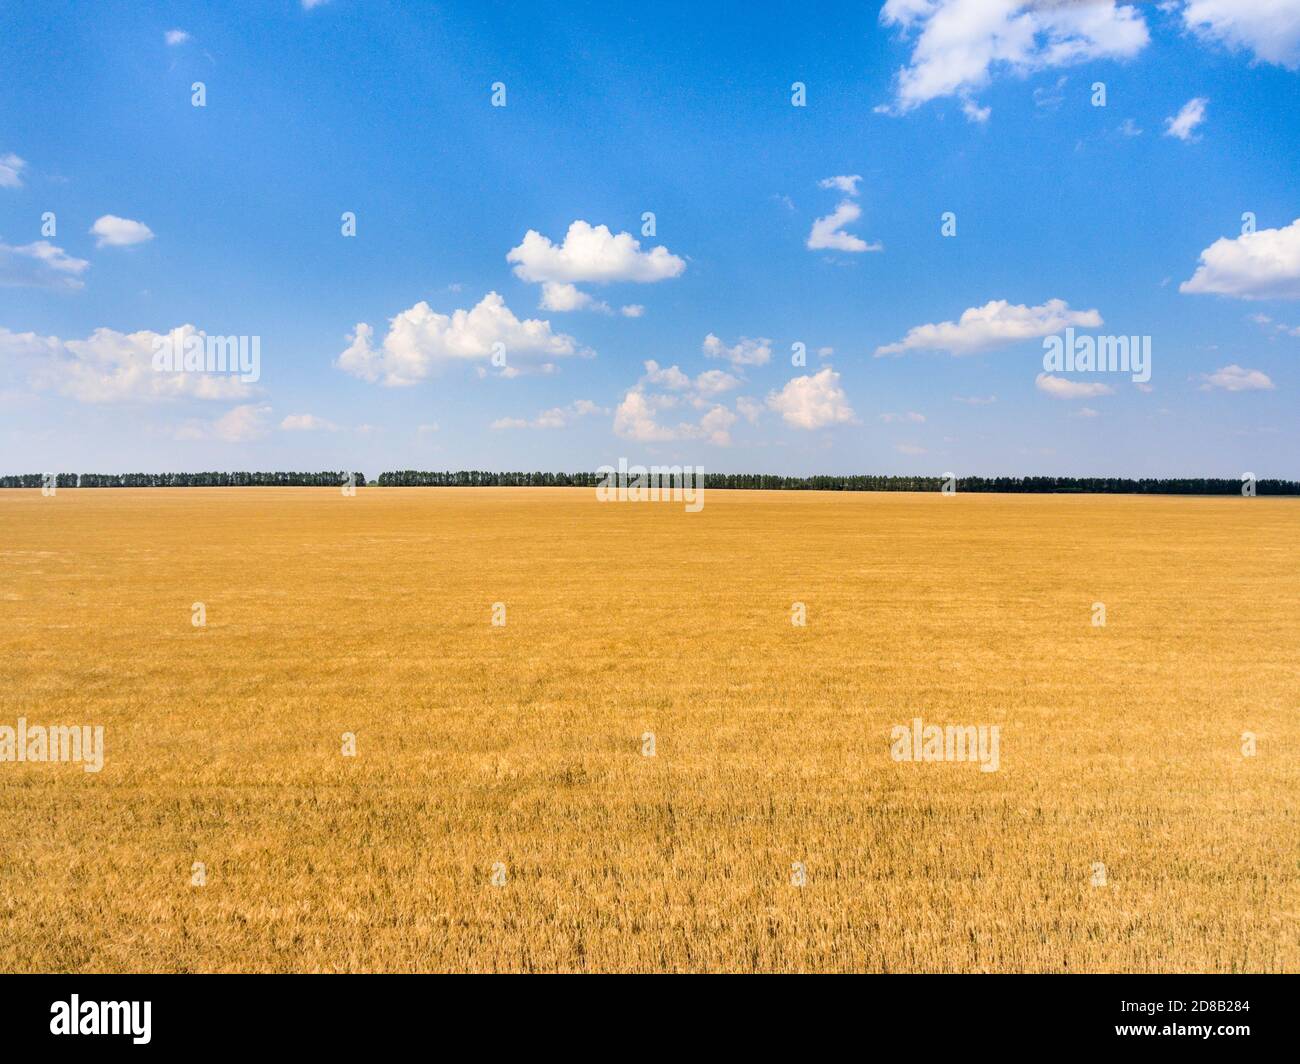 Agriculturally used areas with yellow ripe wheat, warm sunny day with blue sky, panorama Stock Photo